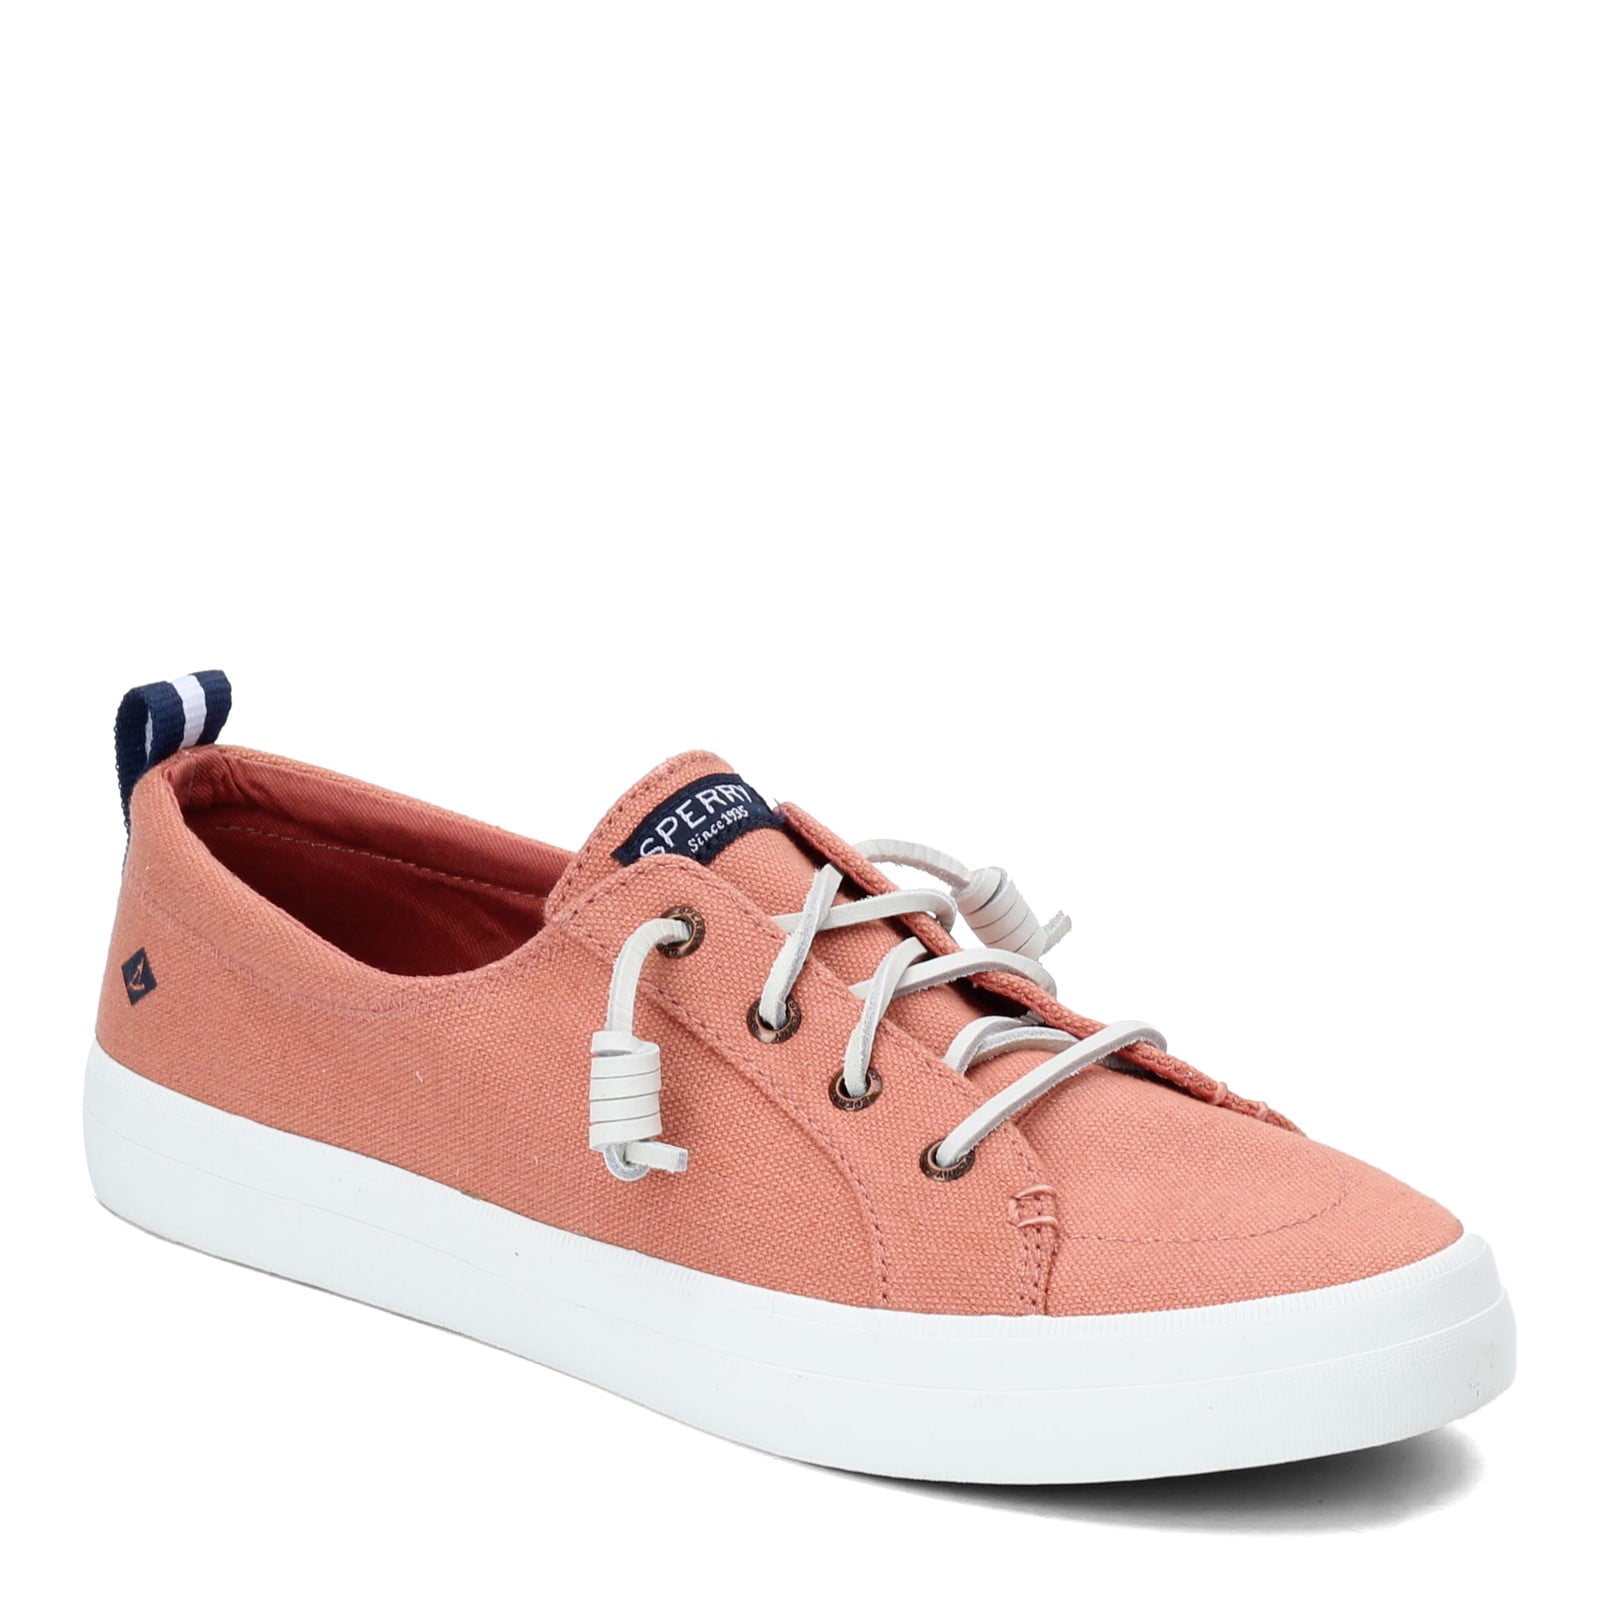 Sperry Top-Sider Womens Crest Vibe Sneaker